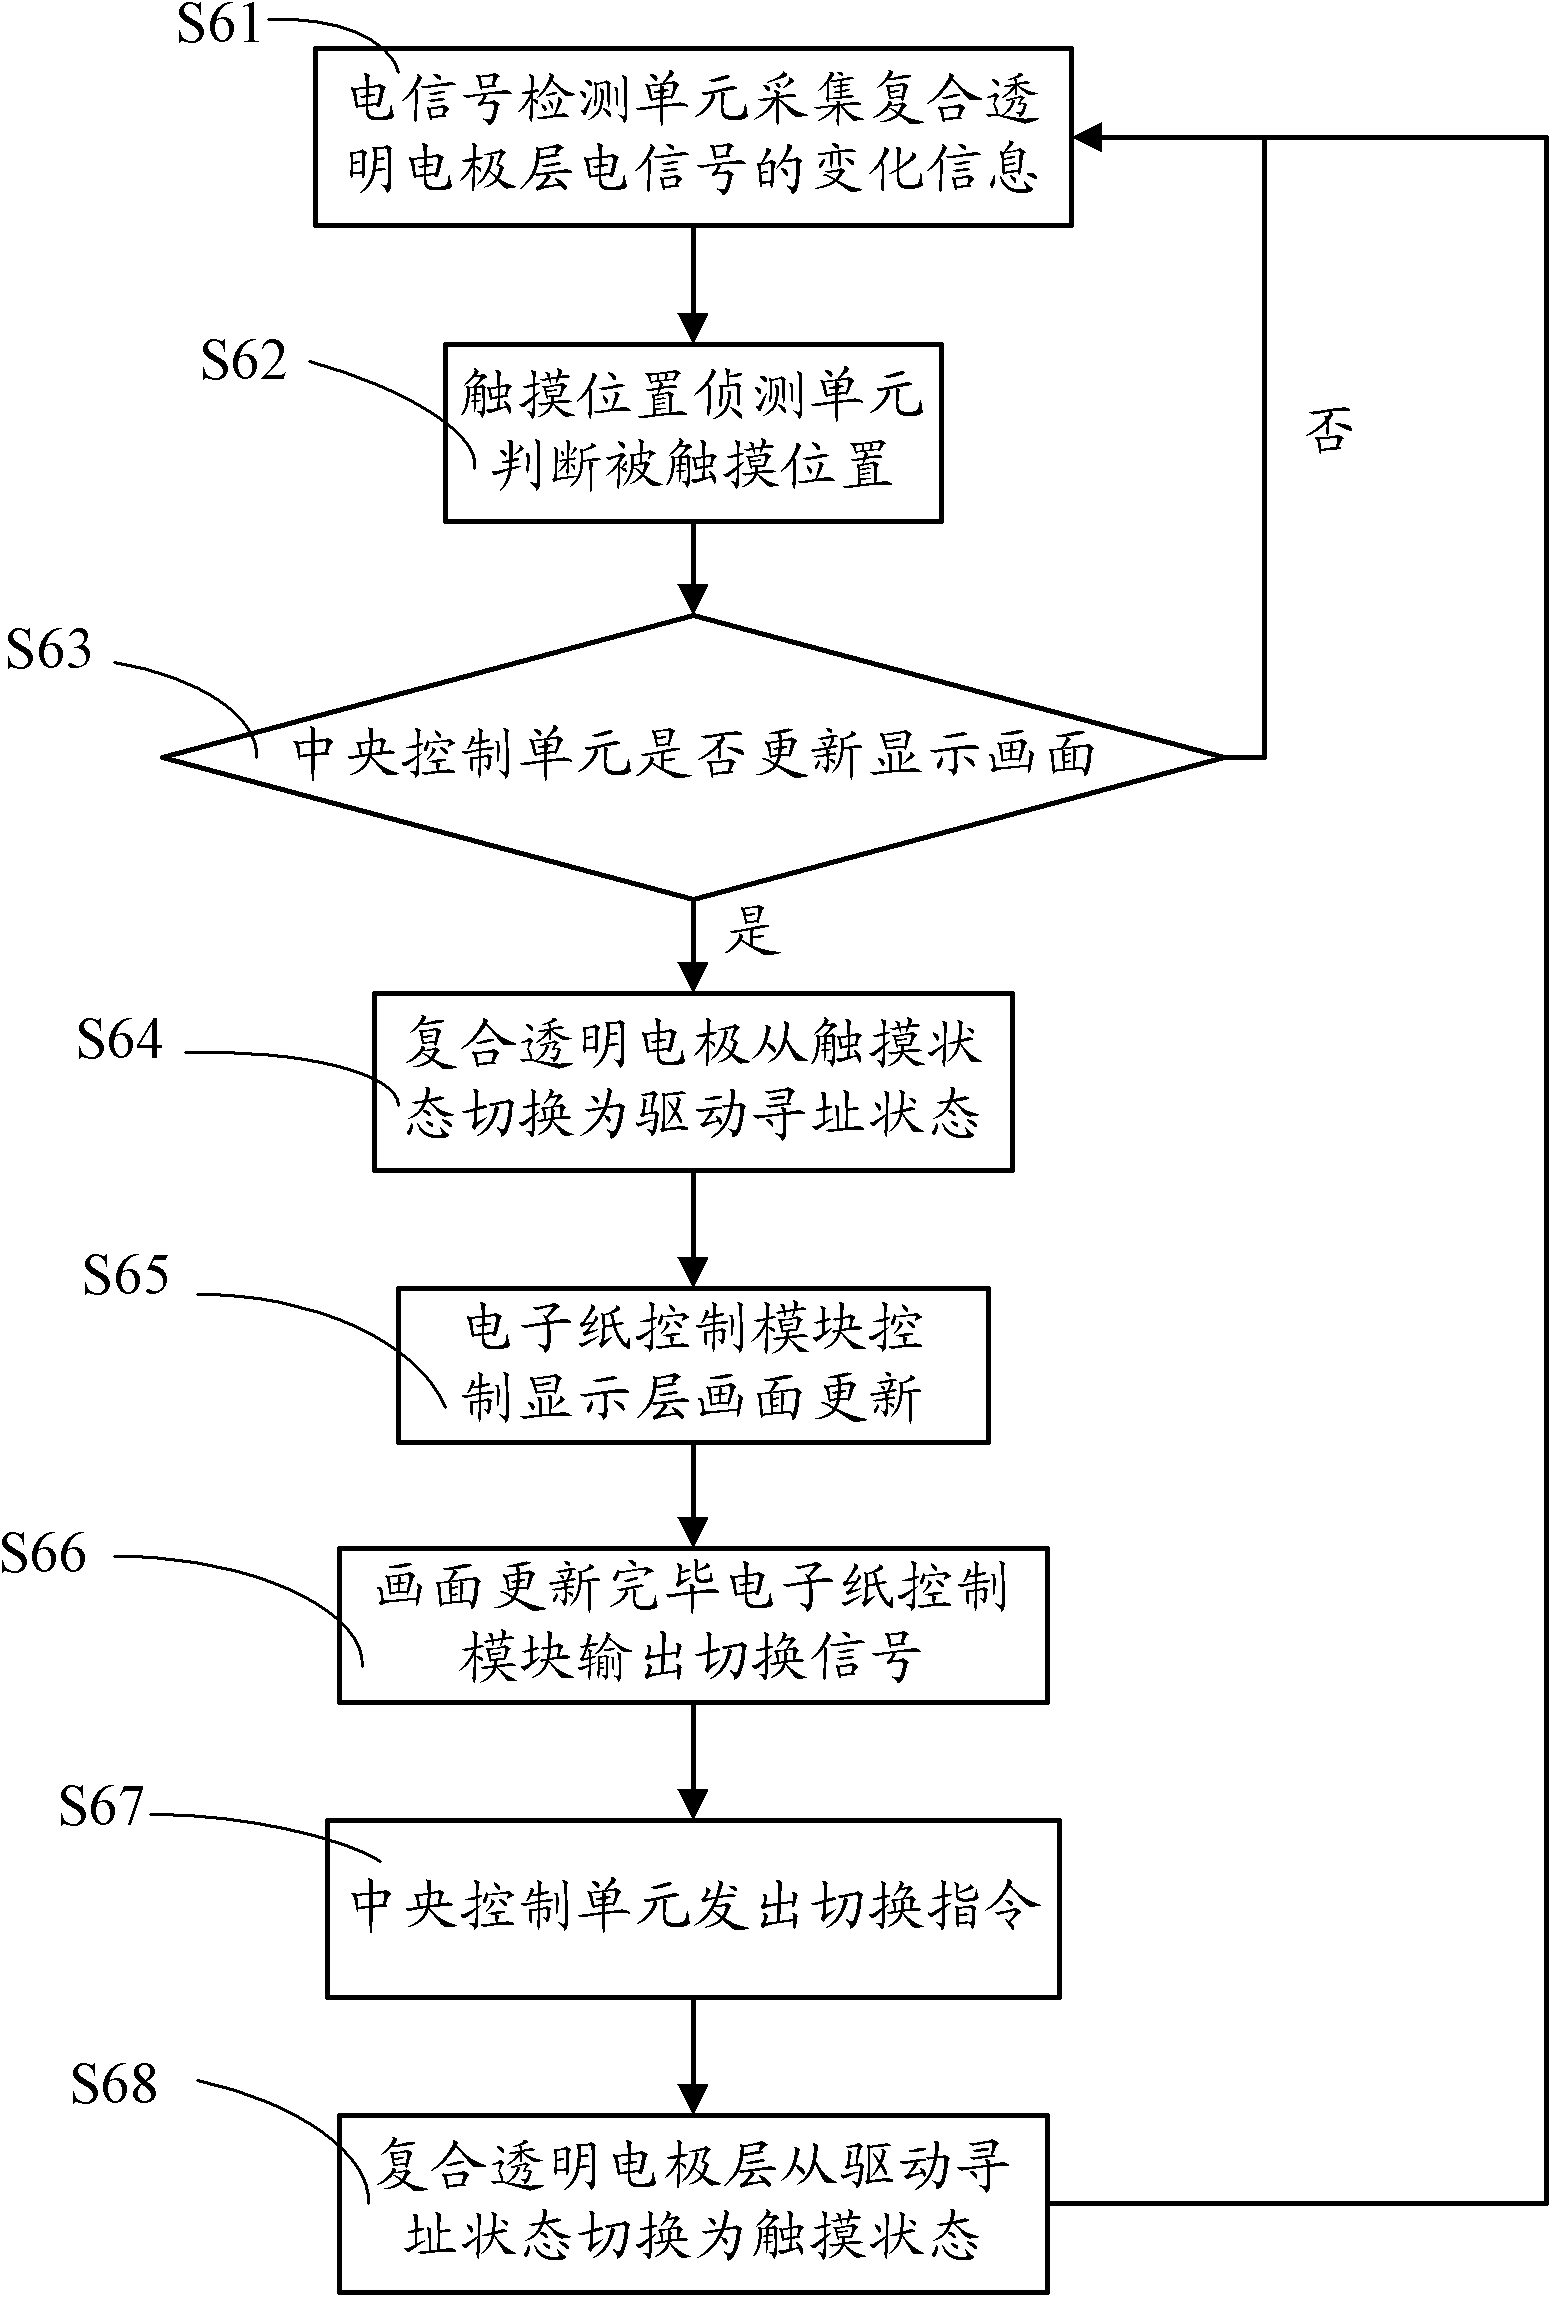 Electronic paper display device with touch function